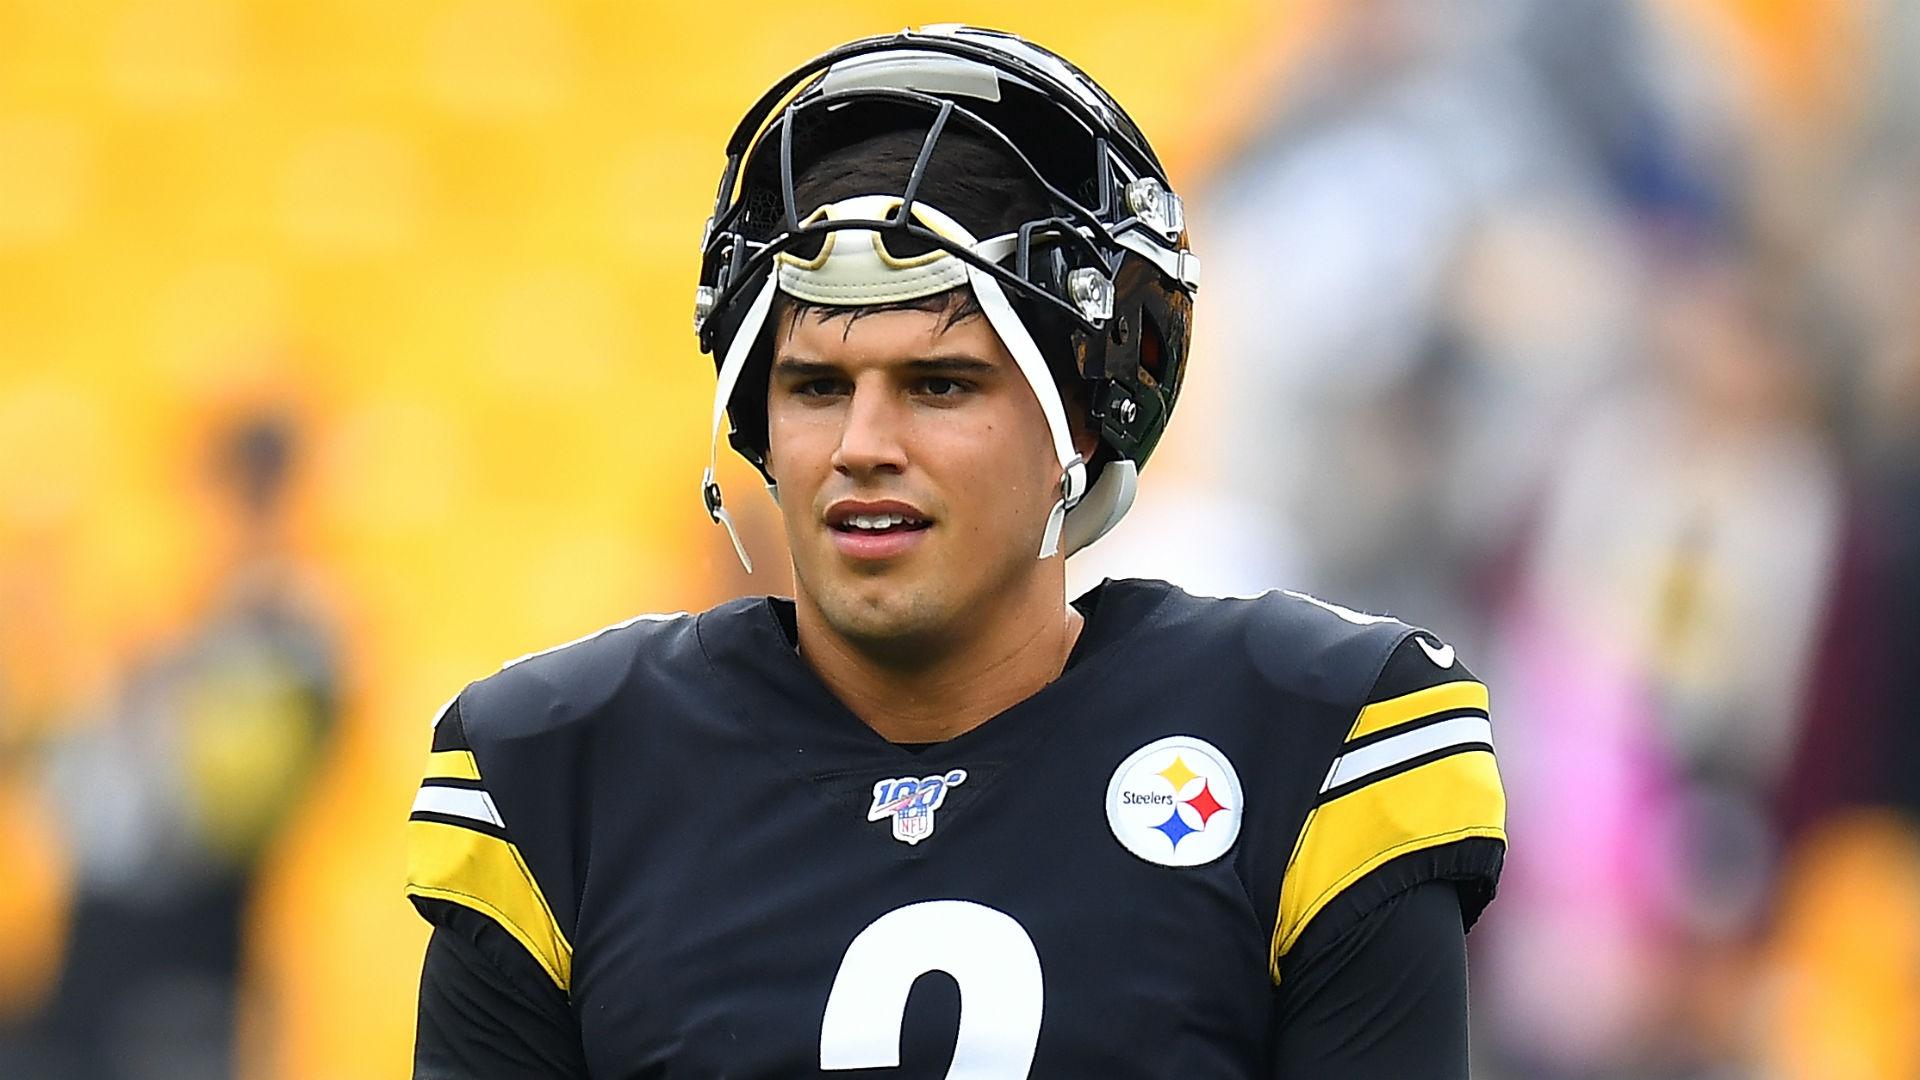 Steelers’ Mason Rudolph gets real about not earning his $1,080,000 salary…